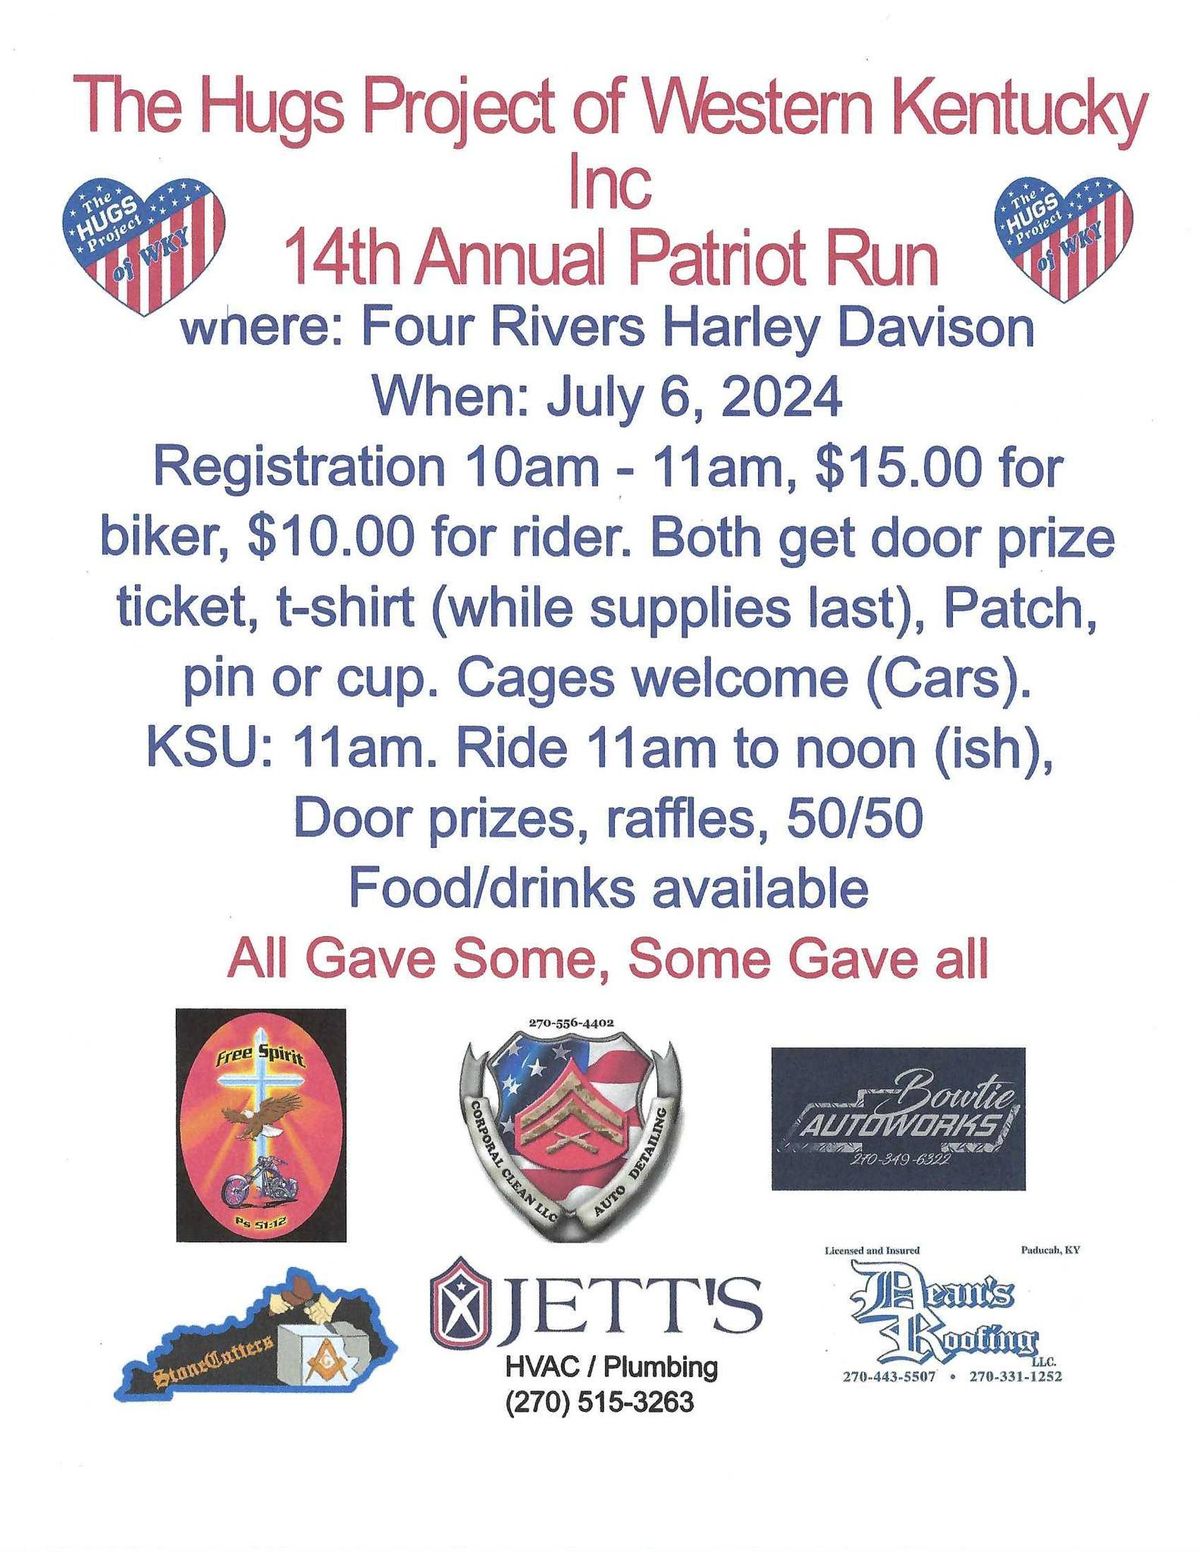 THE HUGS PROJECT OF WESTERN KY INC 14TH ANNUAL PATRIOT RUN